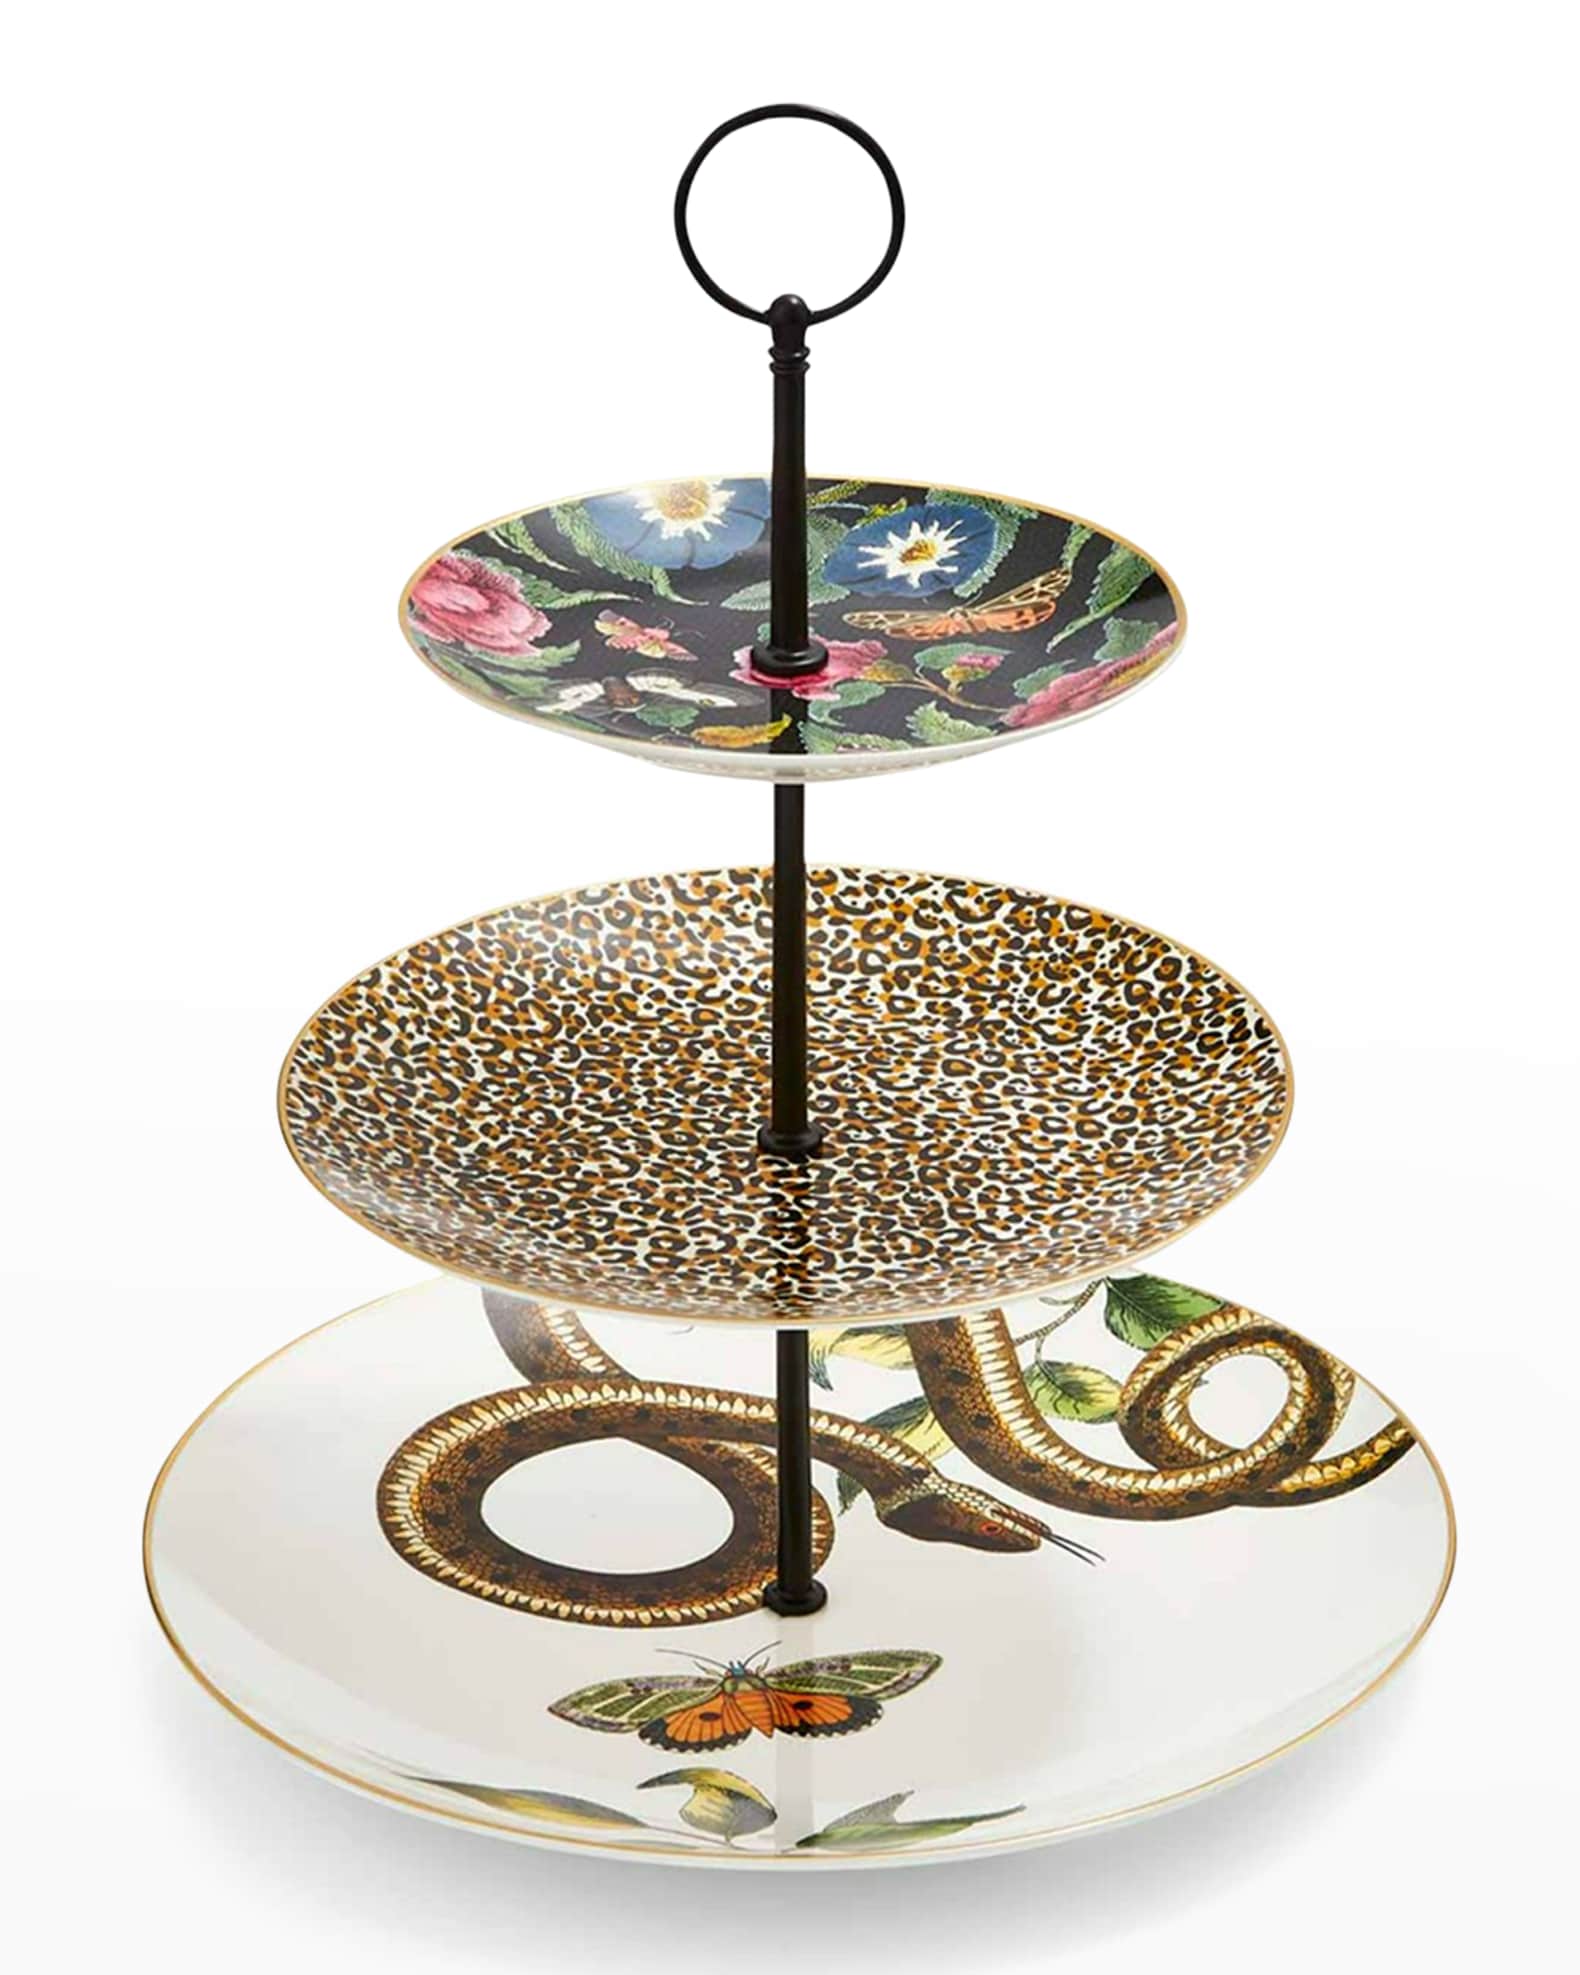 Spode Creatures of Curiosity 3-Tier Cake Stand | Horchow